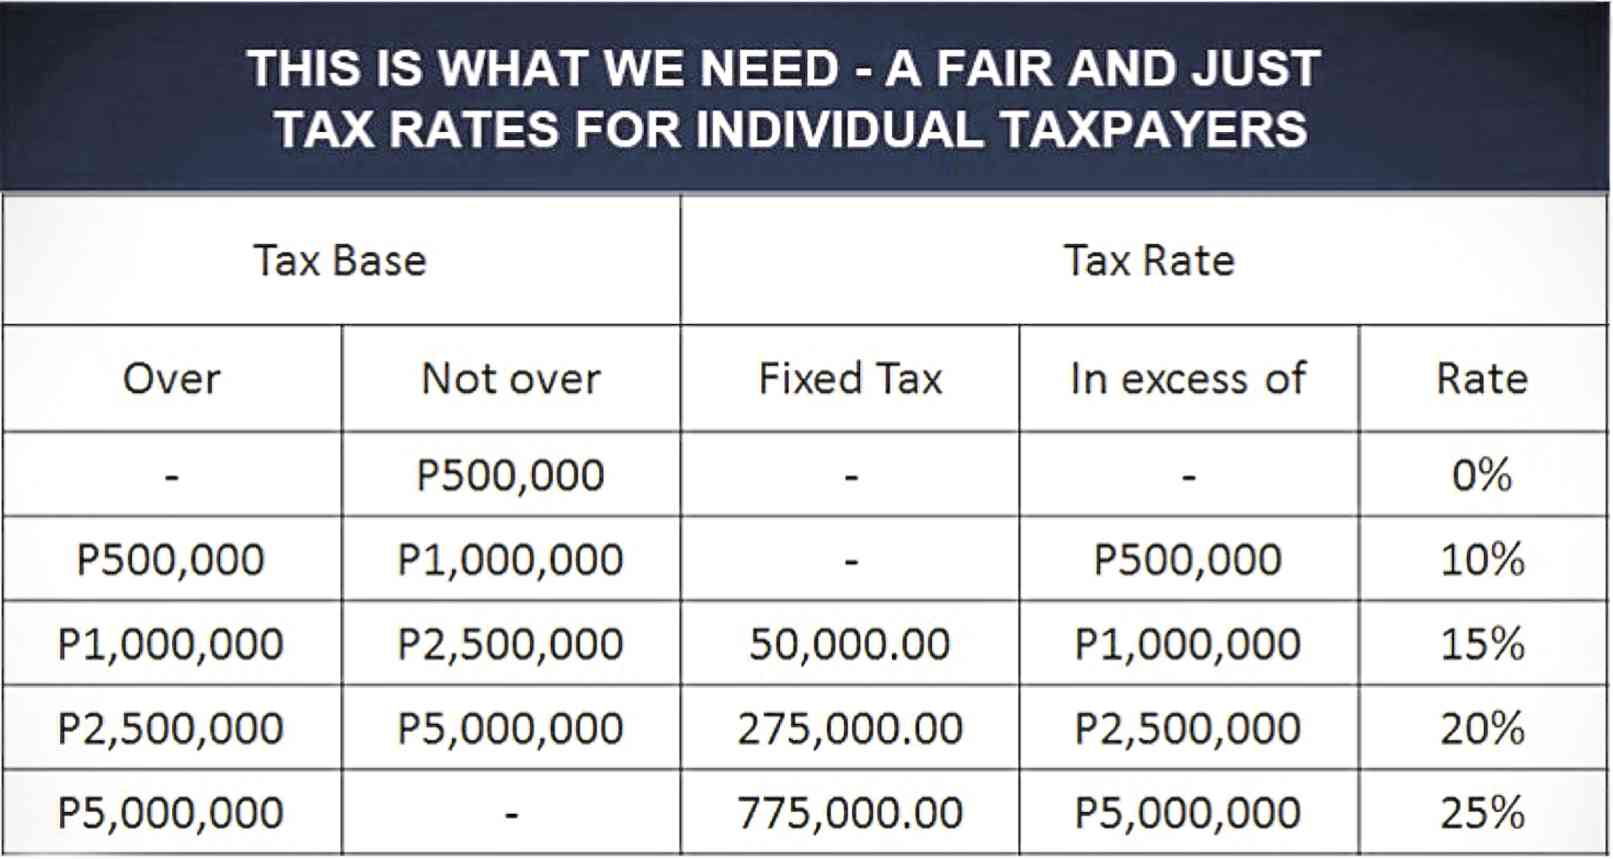 income-tax-tables-in-the-philippines-2022-187-pinoy-money-talk-riset